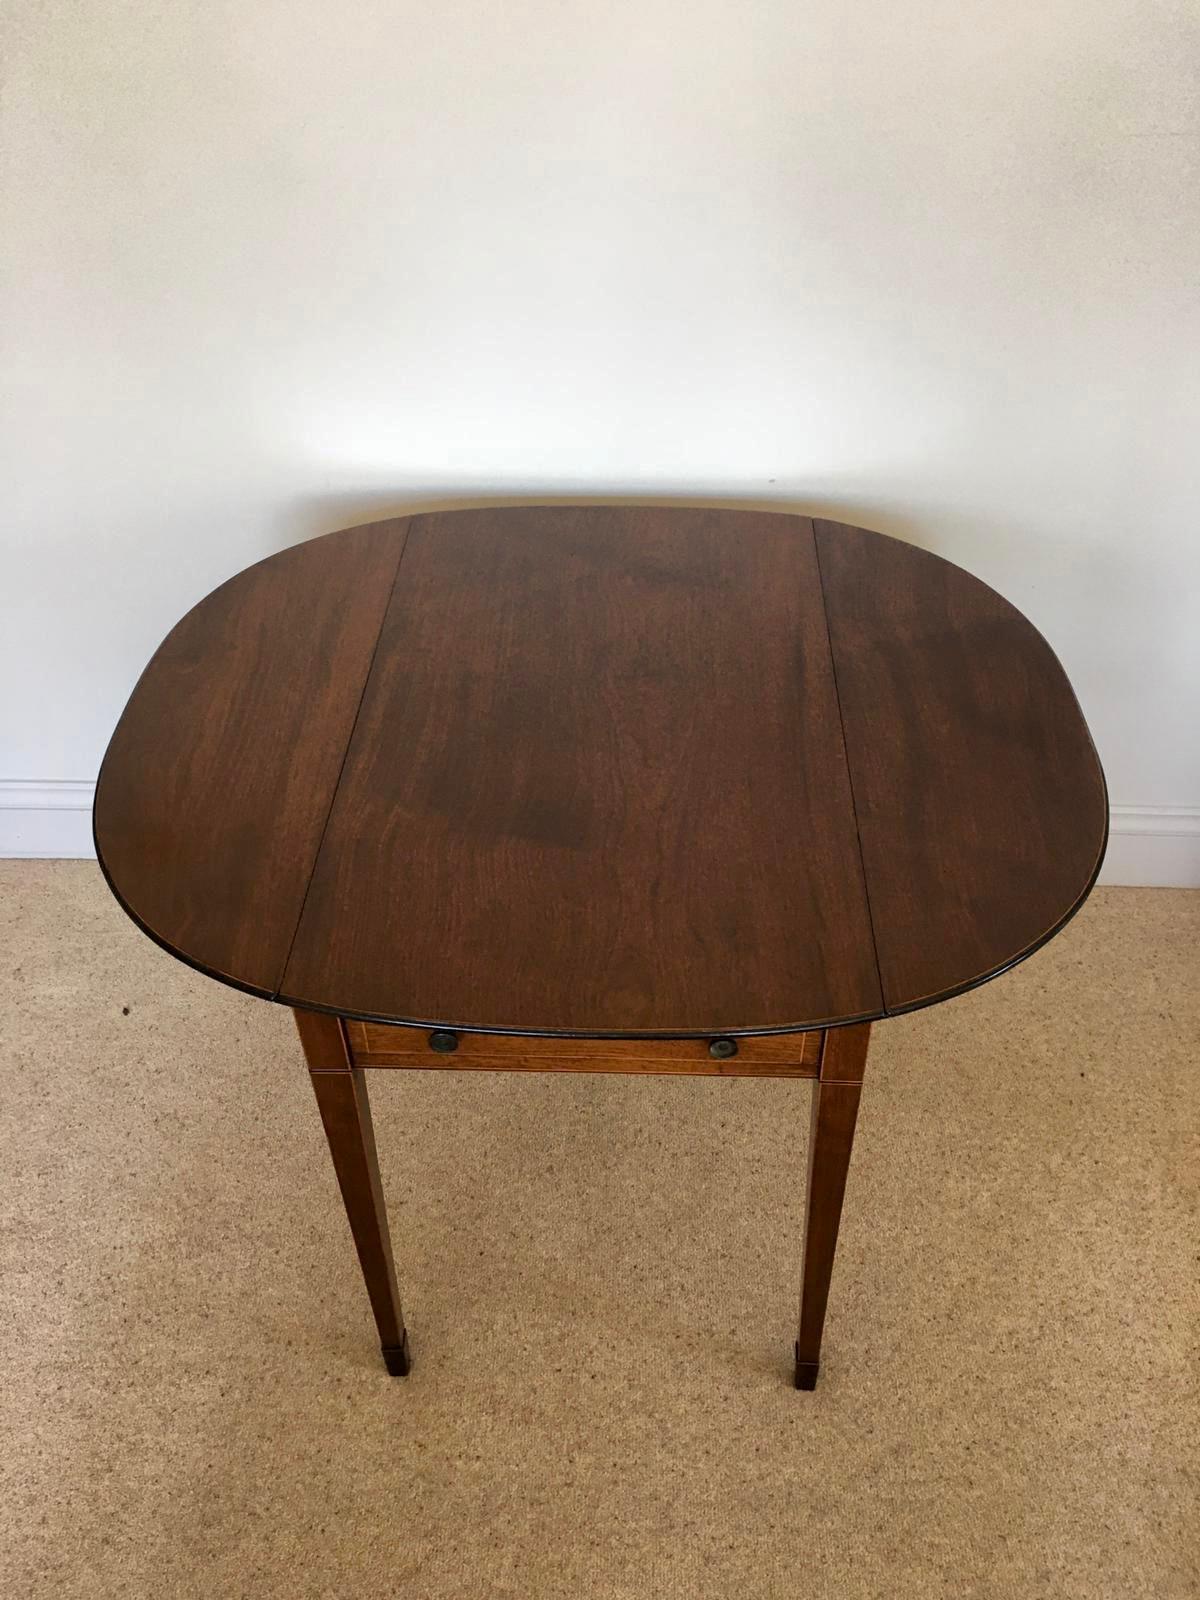 19th Century Fine Quality Antique Inlaid Mahogany Pembroke Table For Sale